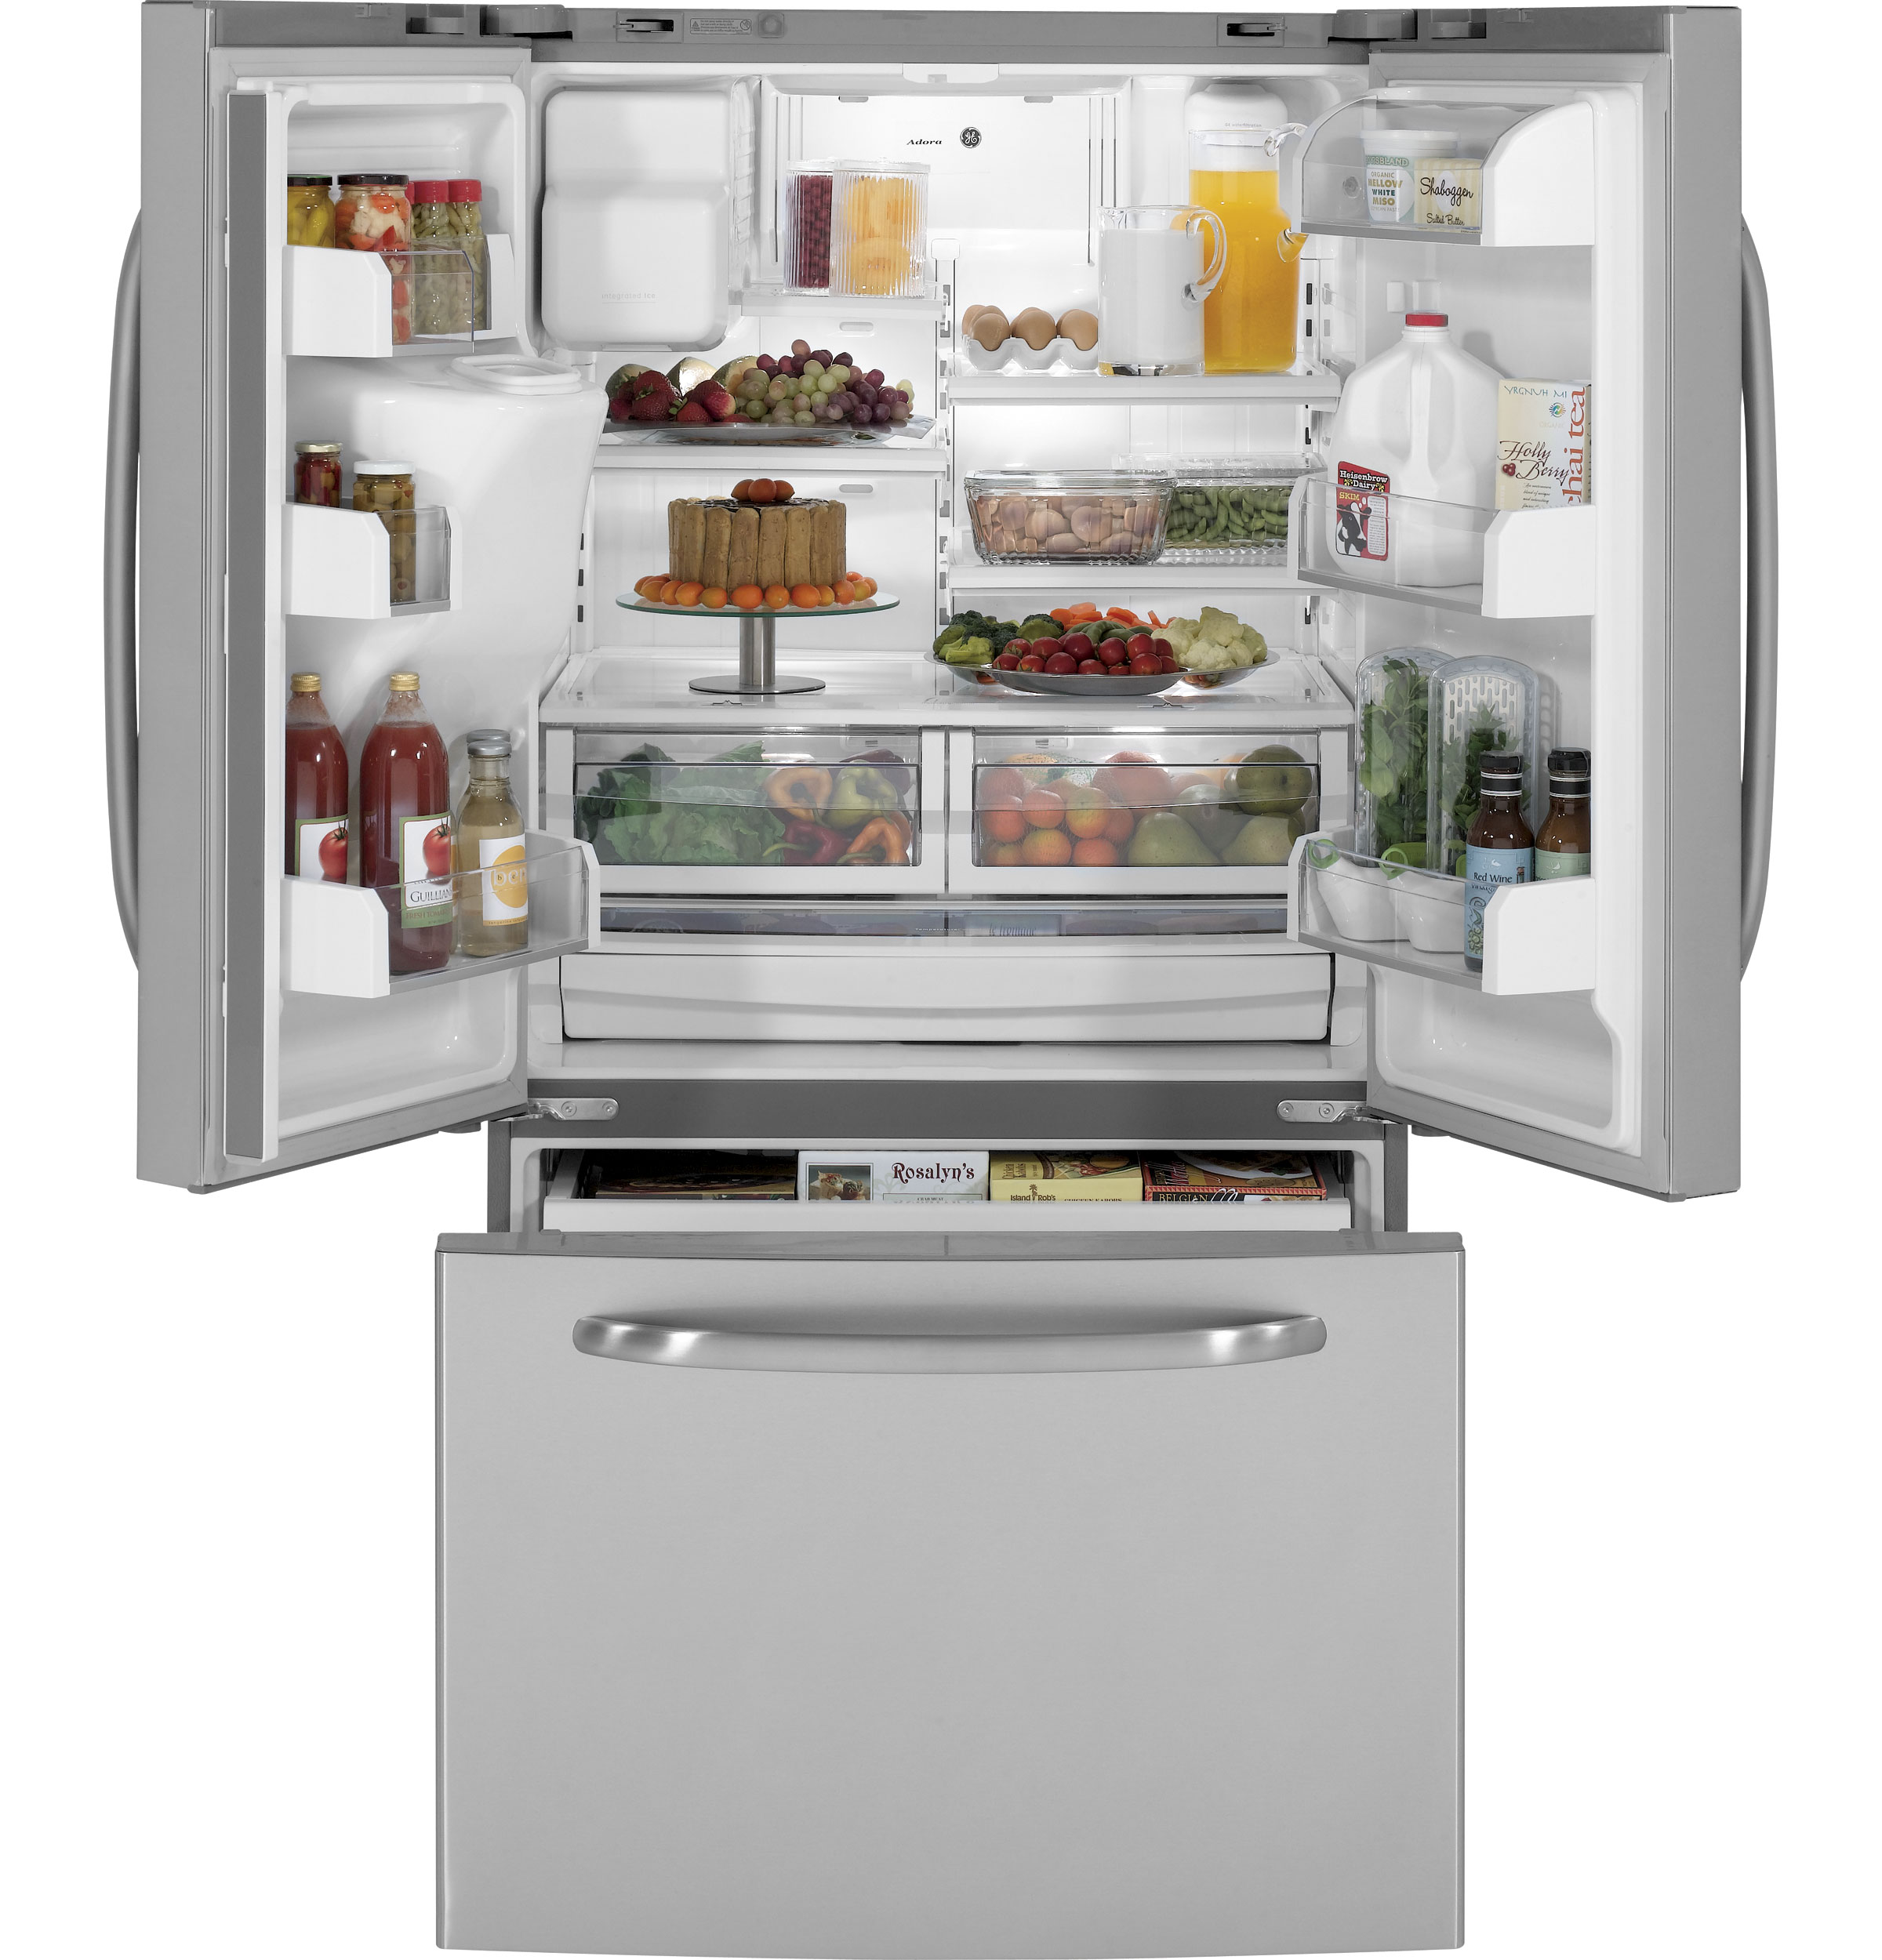 GE® ENERGY STAR® 28.5 Cu. Ft. French-Door Refrigerator with Icemaker